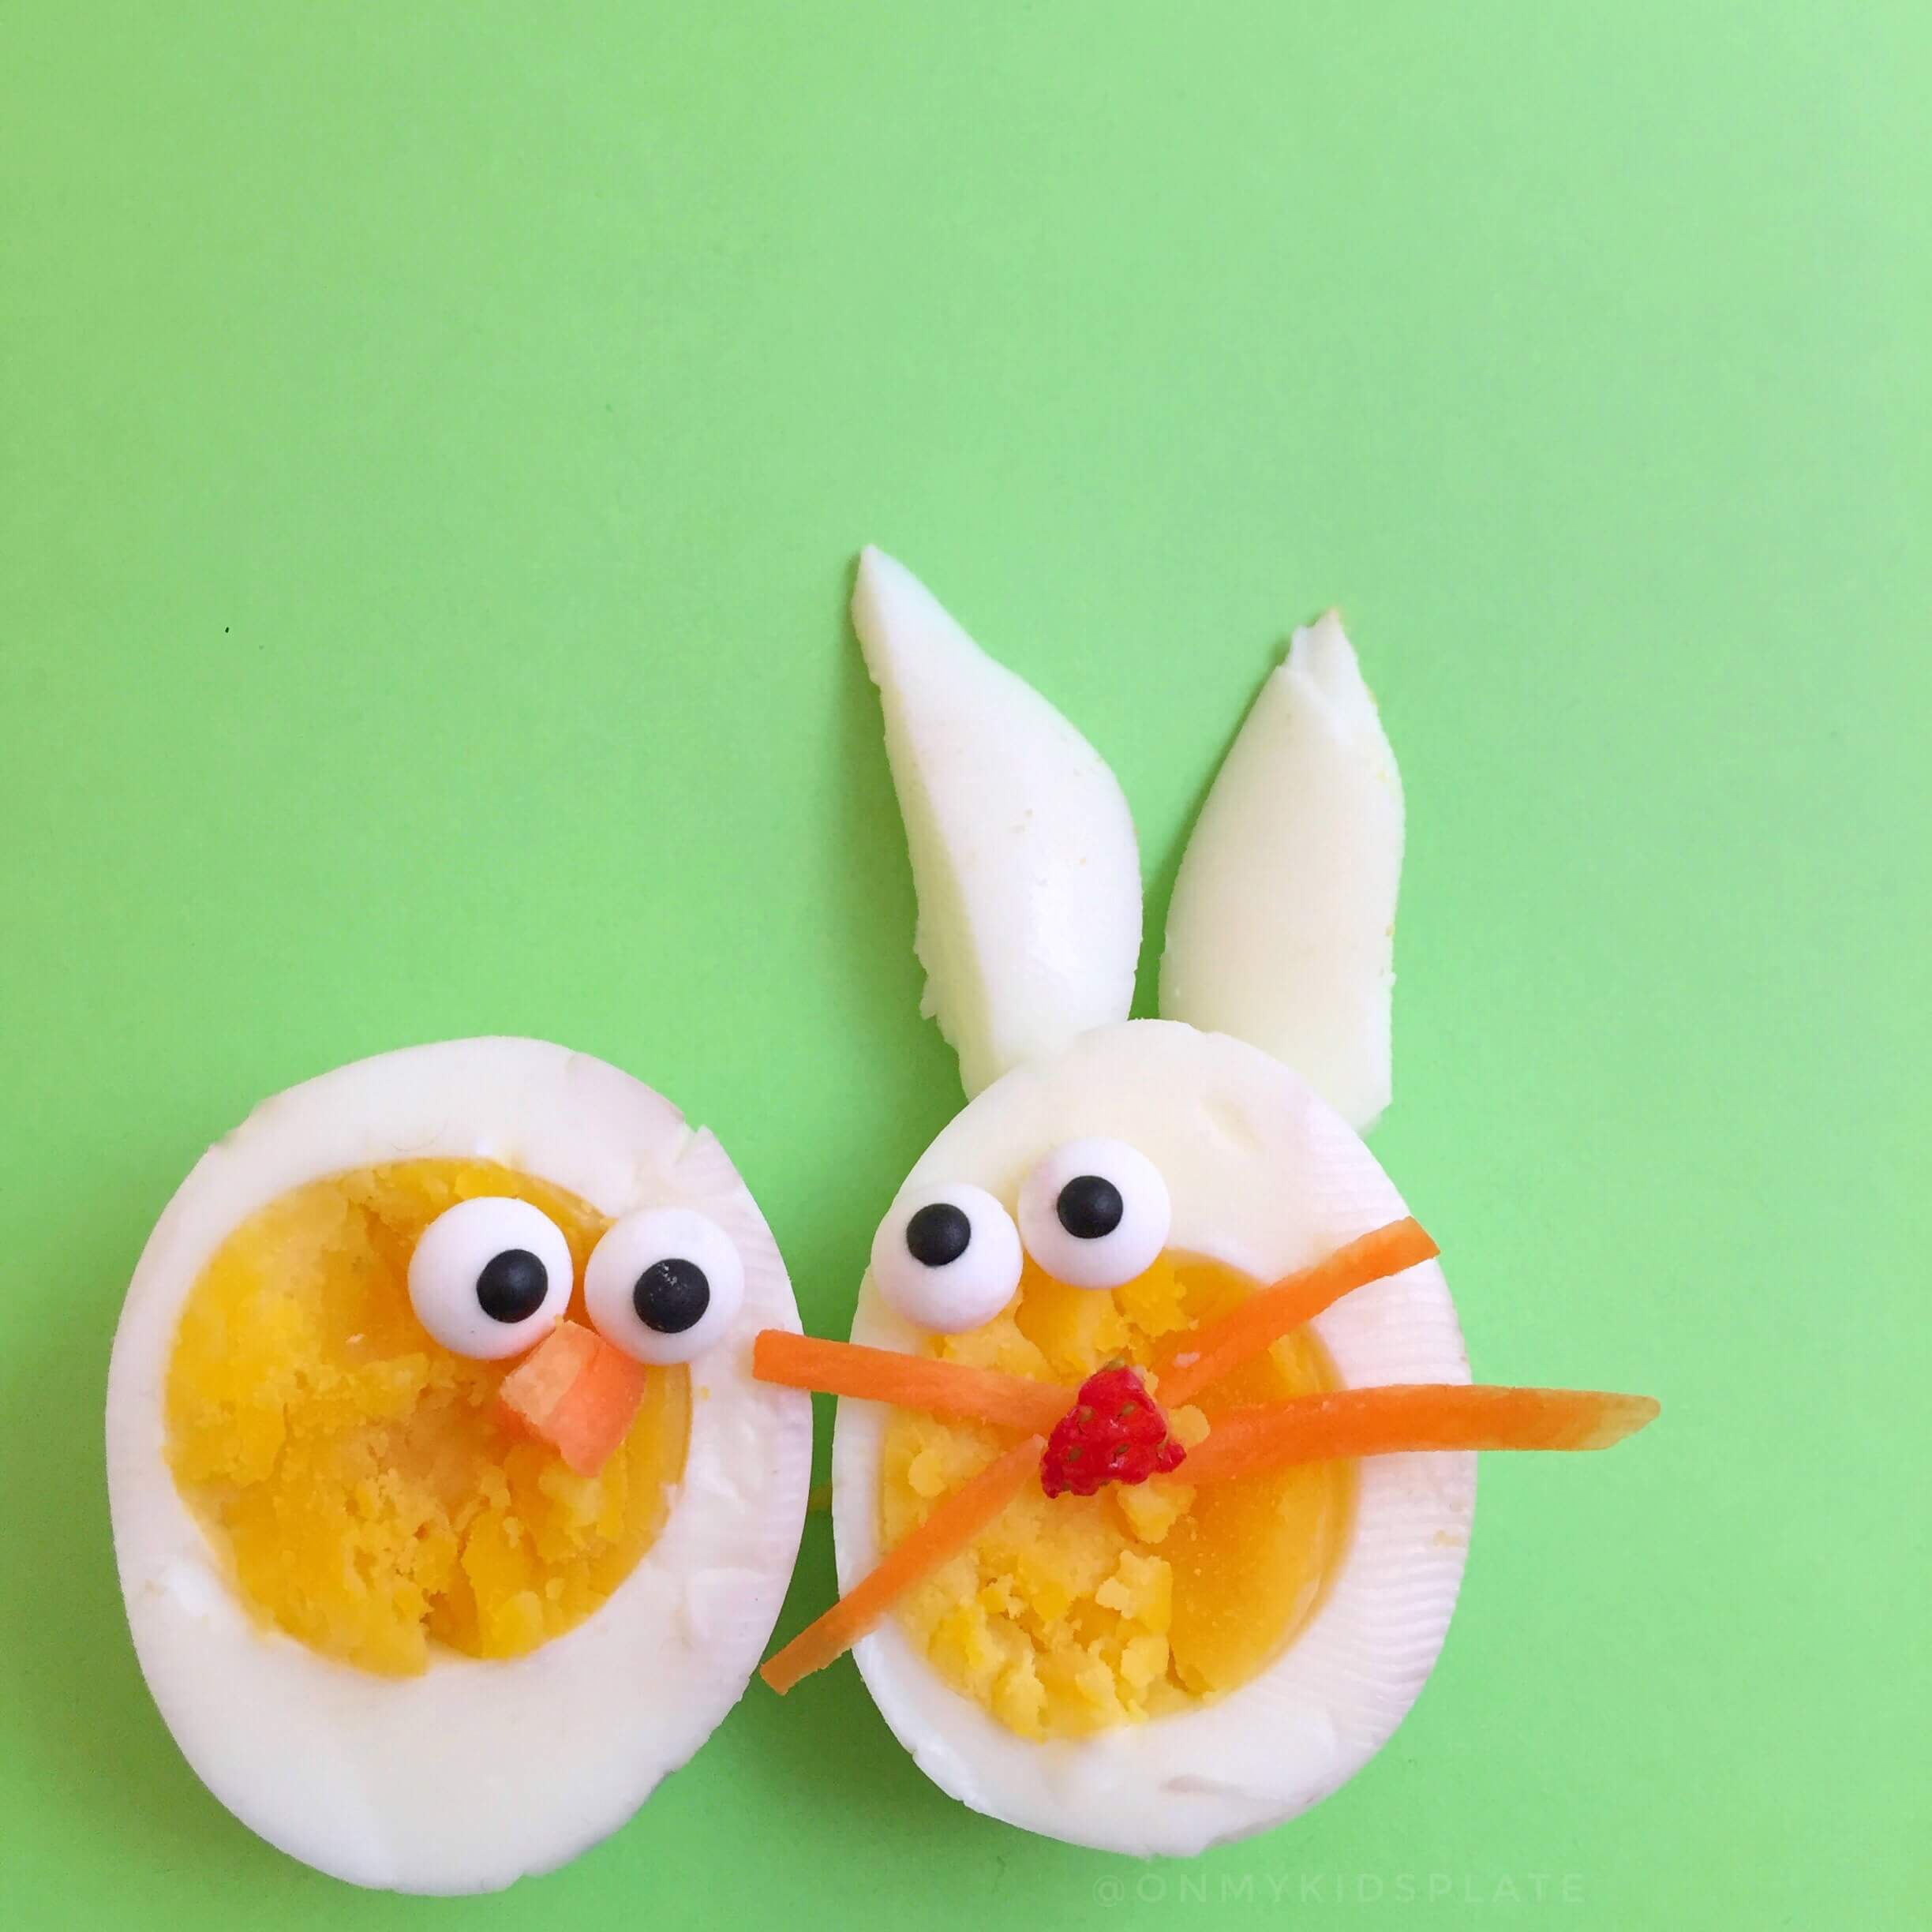 Hard-boiled eggs on a green background cut in half decorated like a rabbit and a chick.